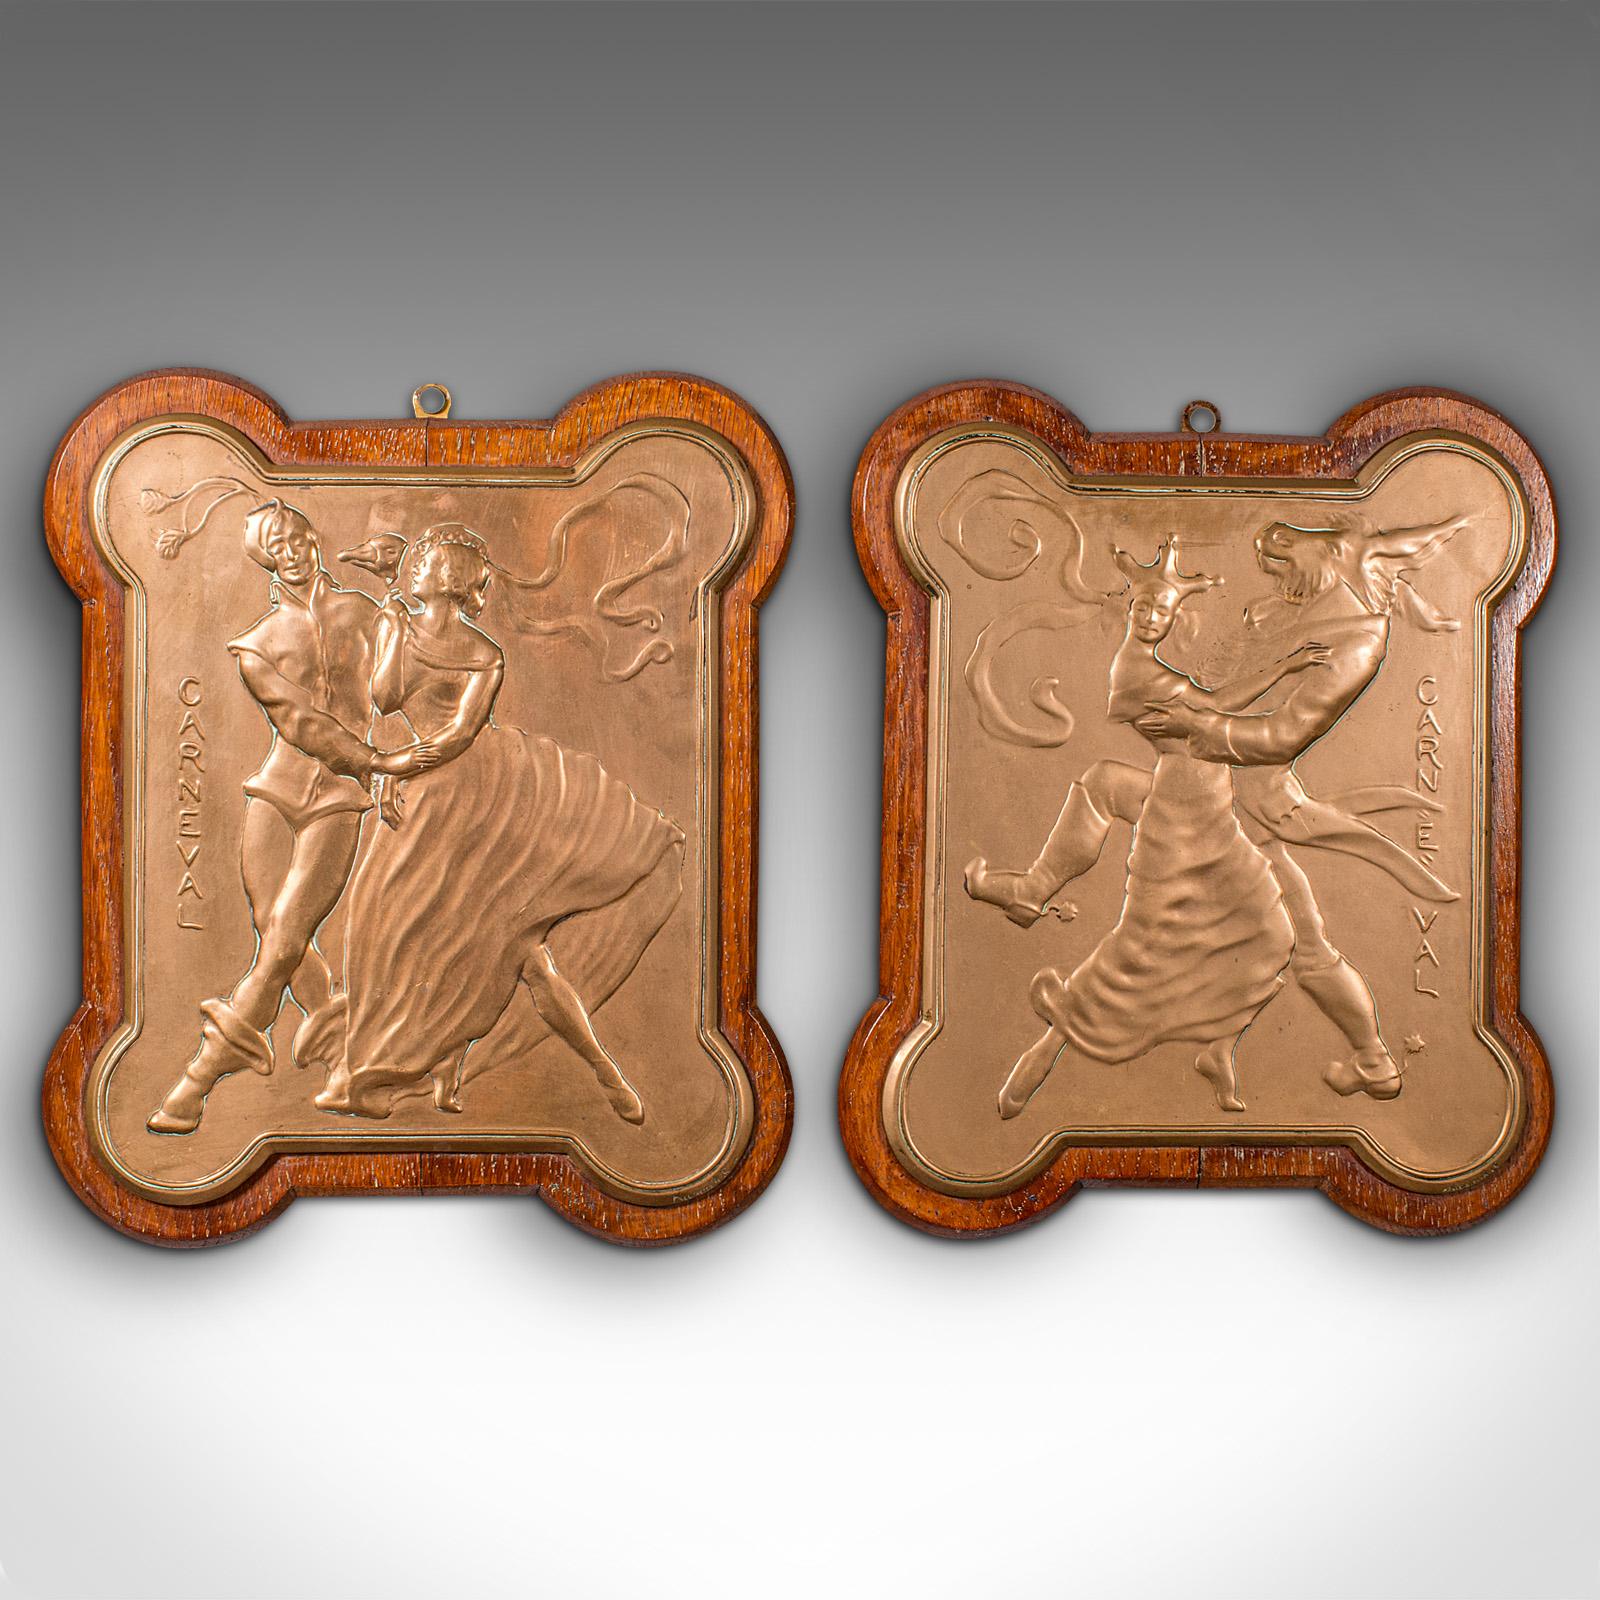 This is a pair of antique carnival plaques. A Venetian, bronze on oak decorative wall plates, dating to the late Victorian period, circa 1900.

Fascinating plaques, of superb quality and distinction
Displaying a desirable aged patina and in good